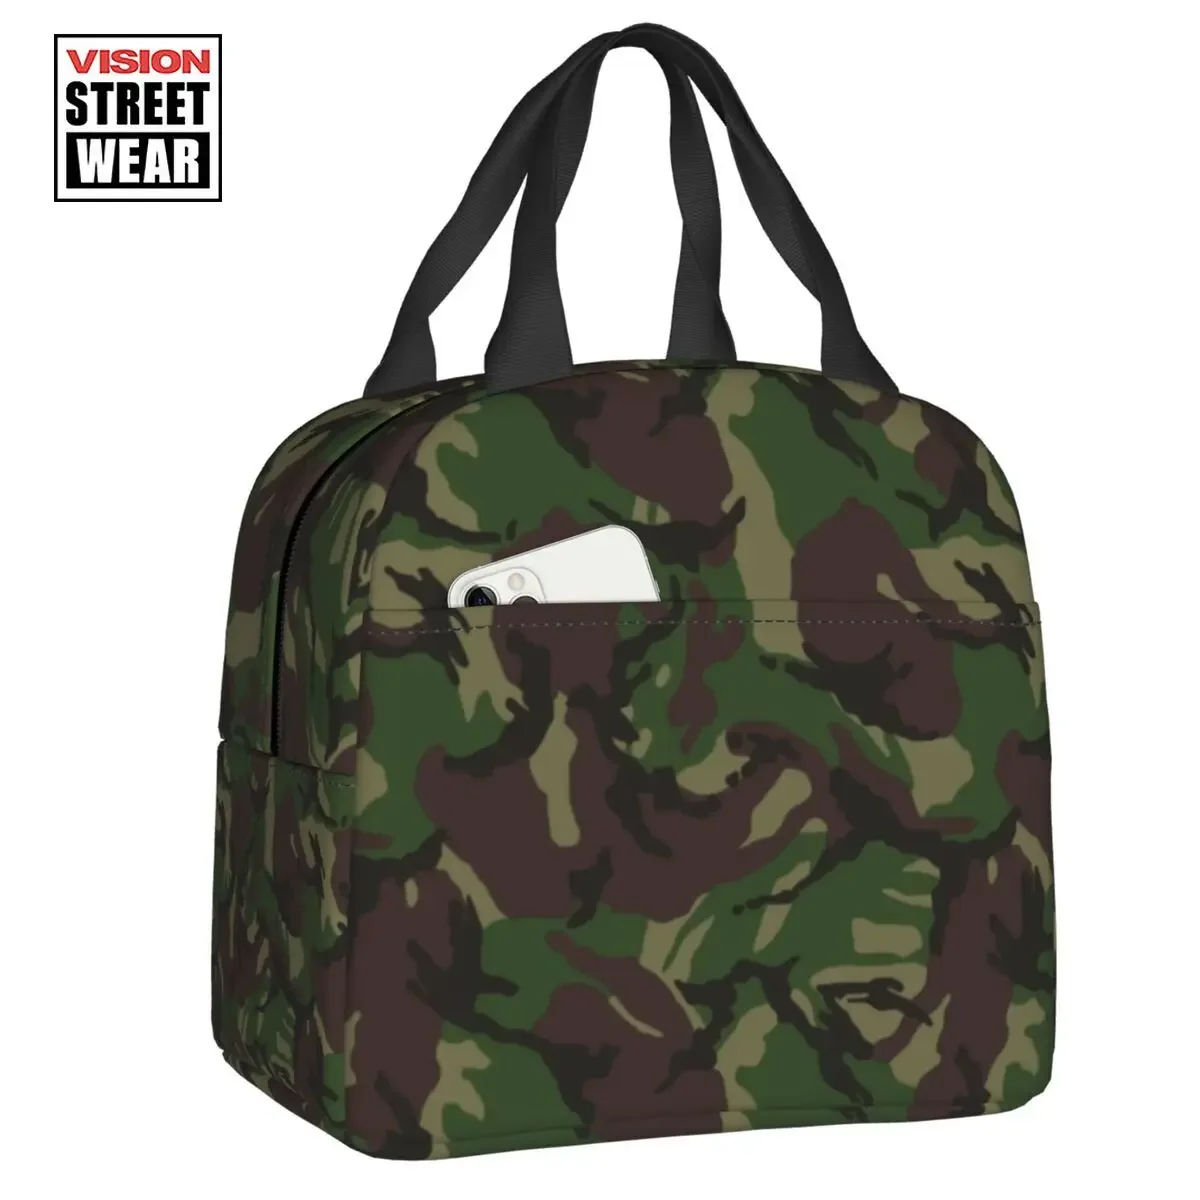 

2023 New British DPM Camo Insulated Lunch Bags Military Army Camouflage Cooler Thermal Food Lunch Box Outdoor Camping Travel